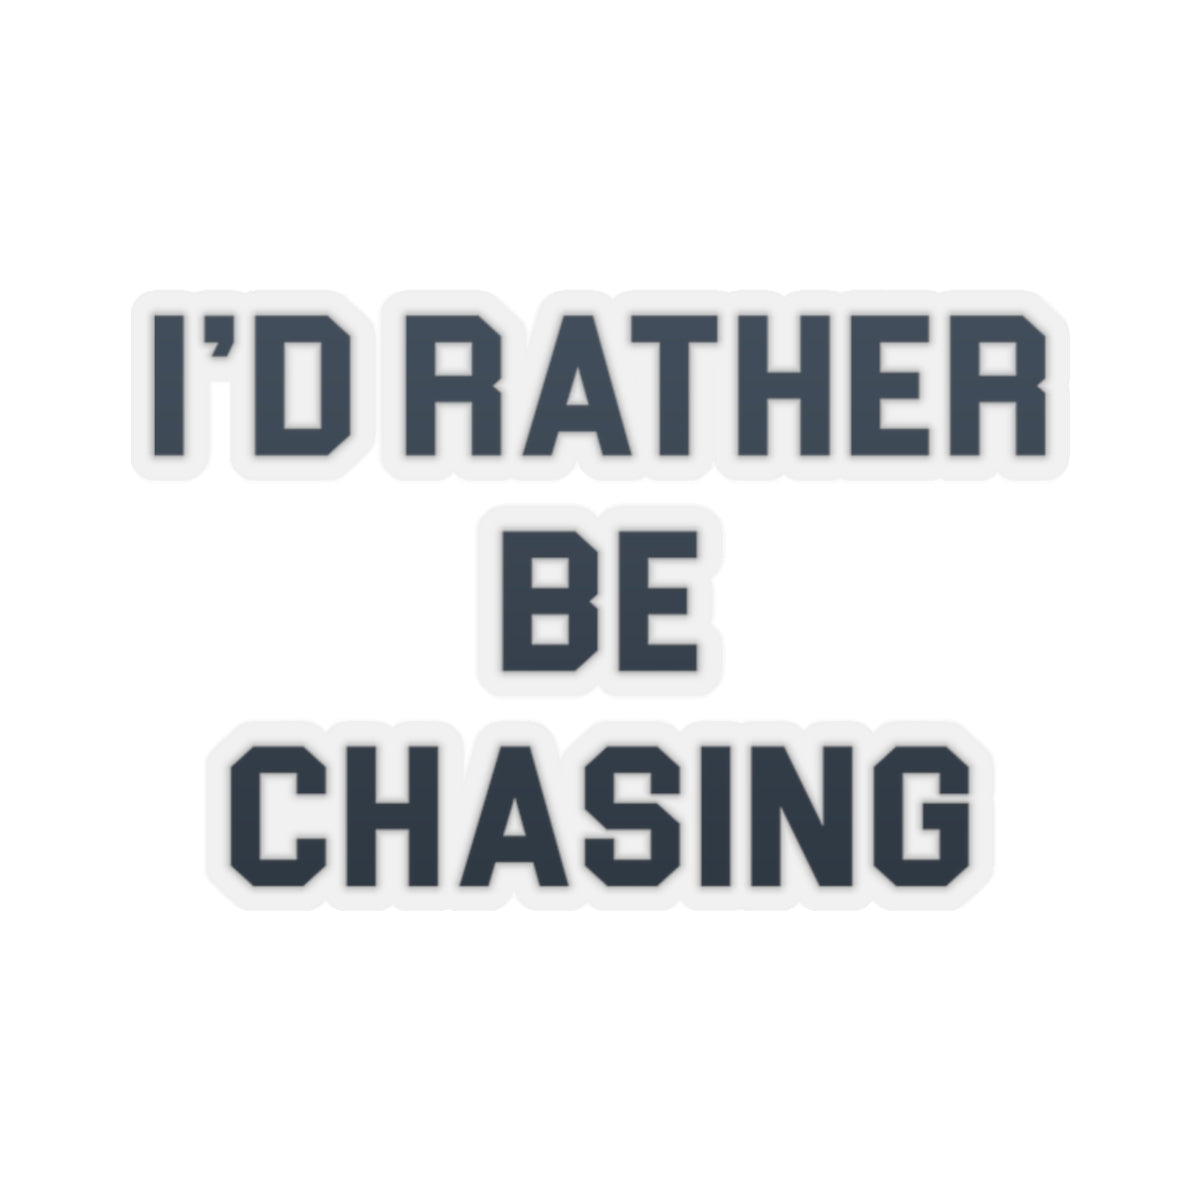 I'd Rather Be Chasing Sticker 